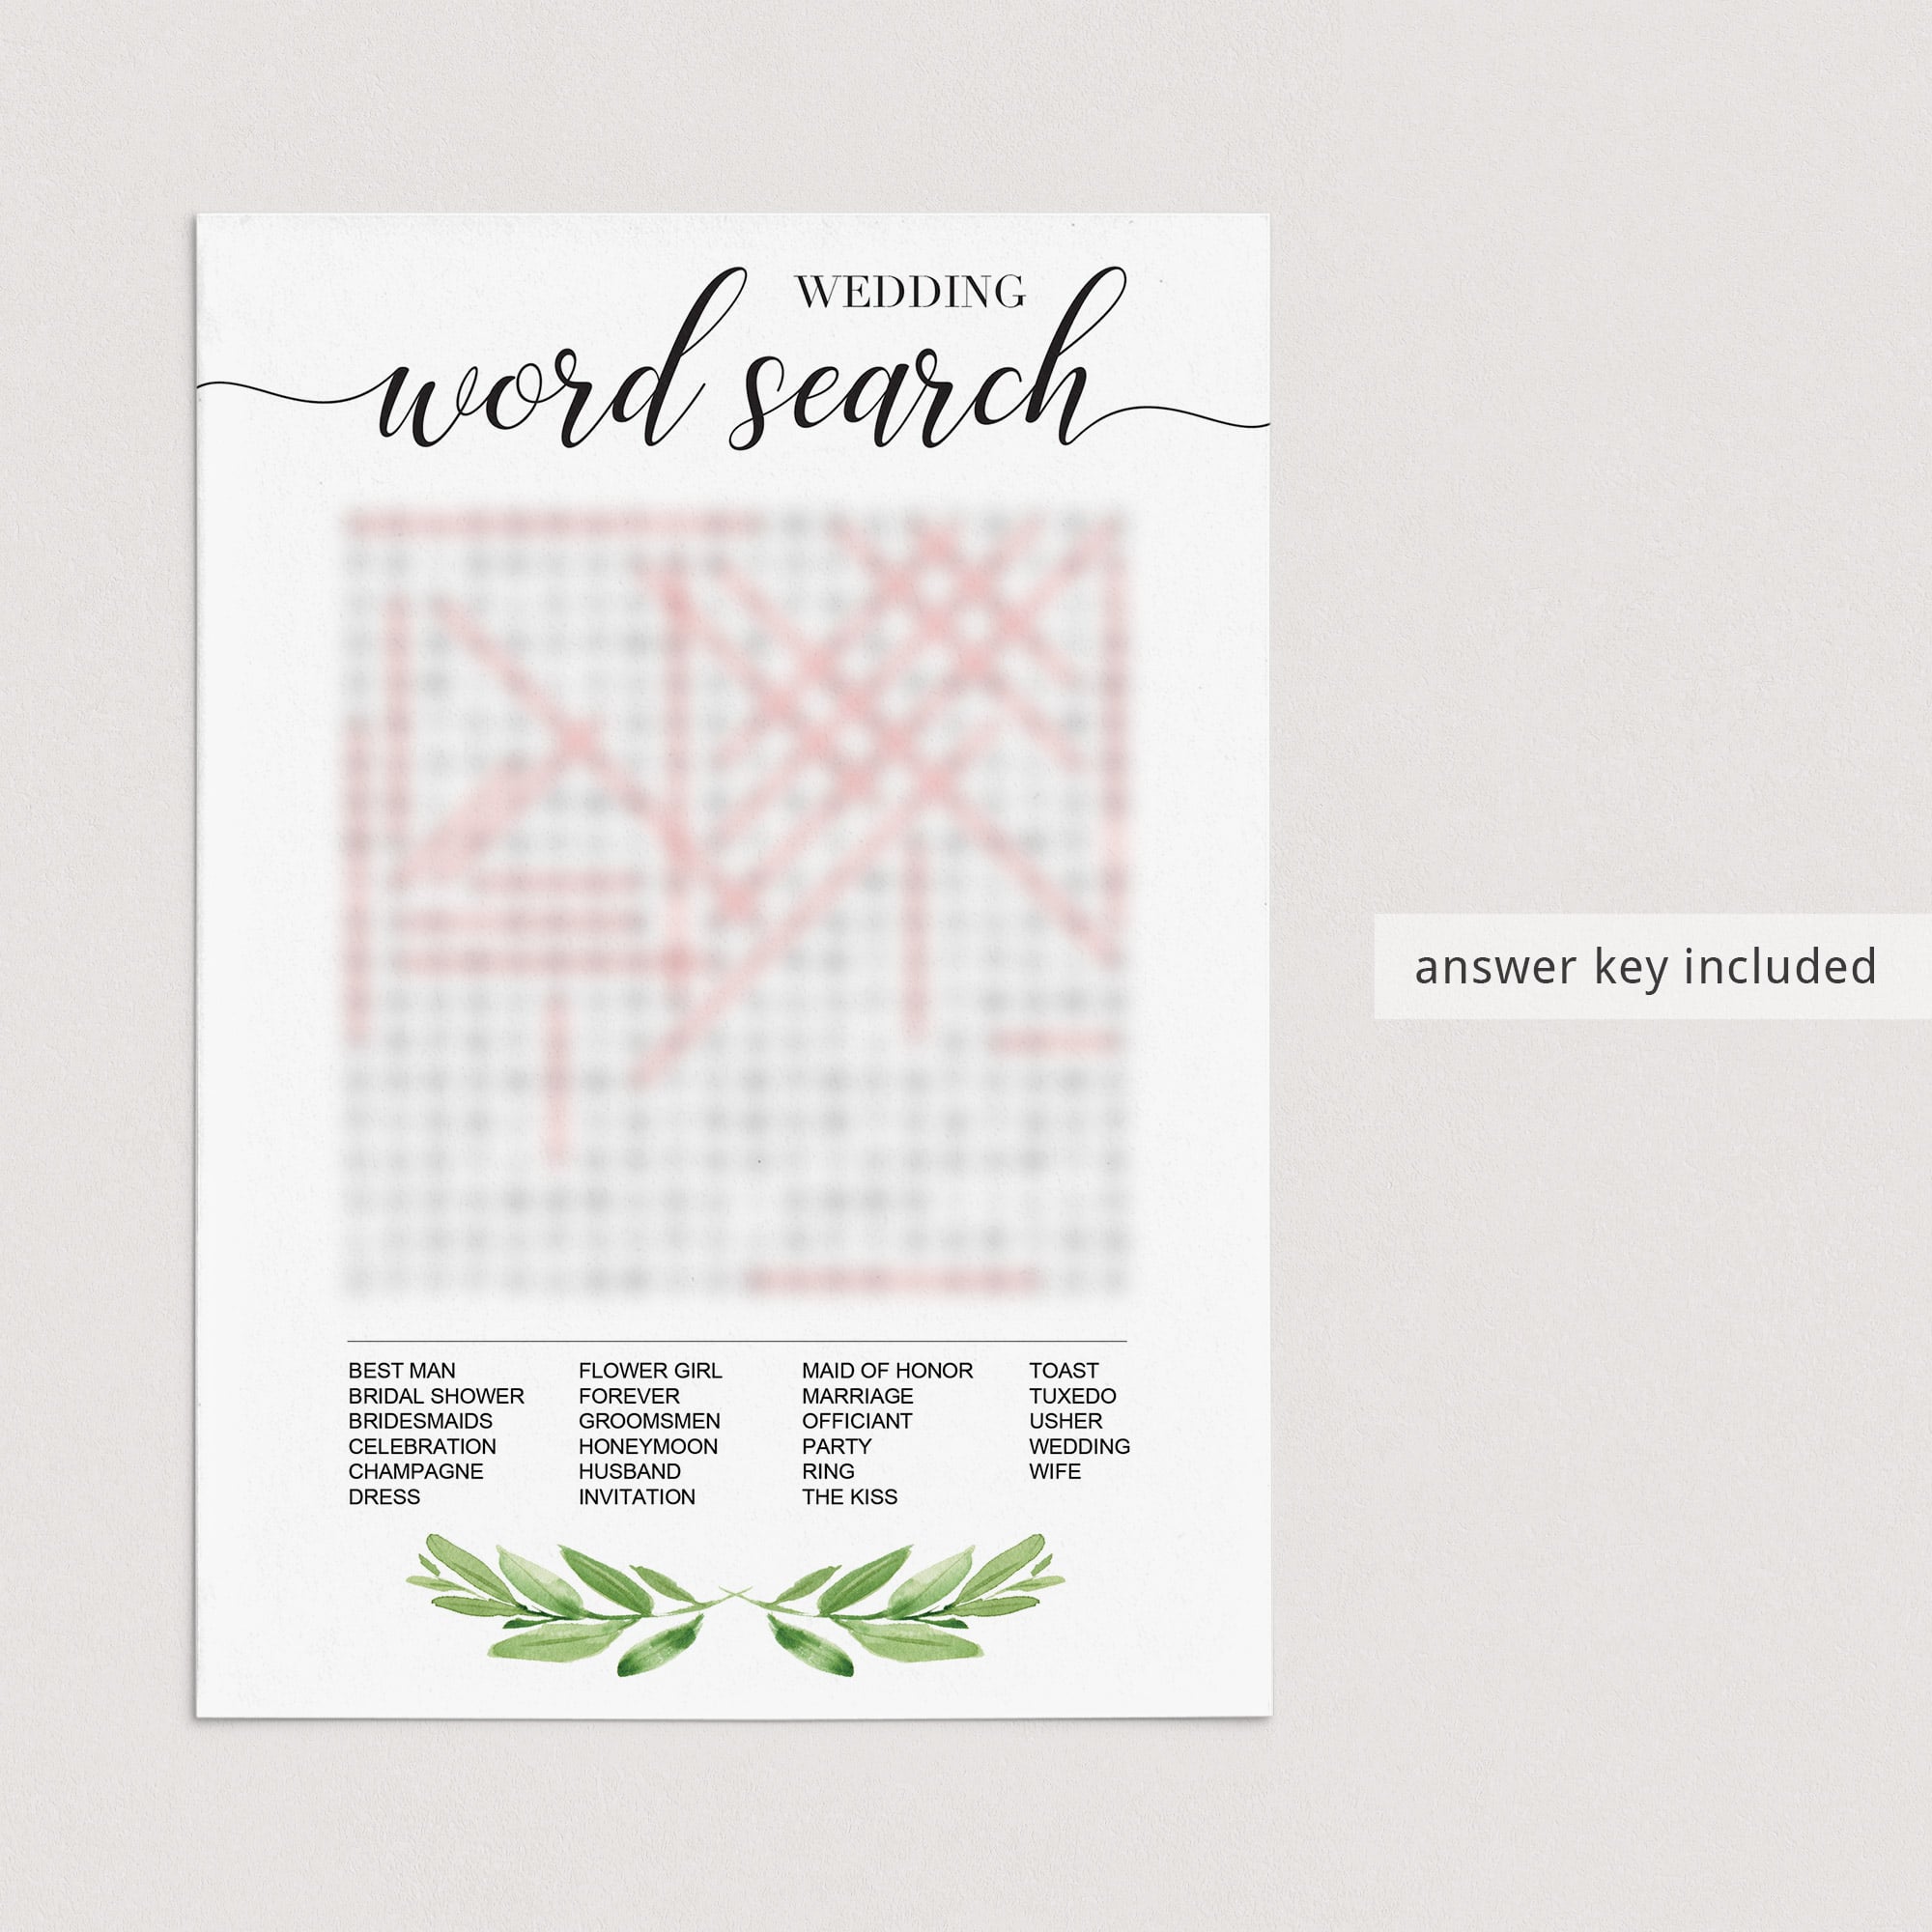 search words wedding related for bridalshower green themed